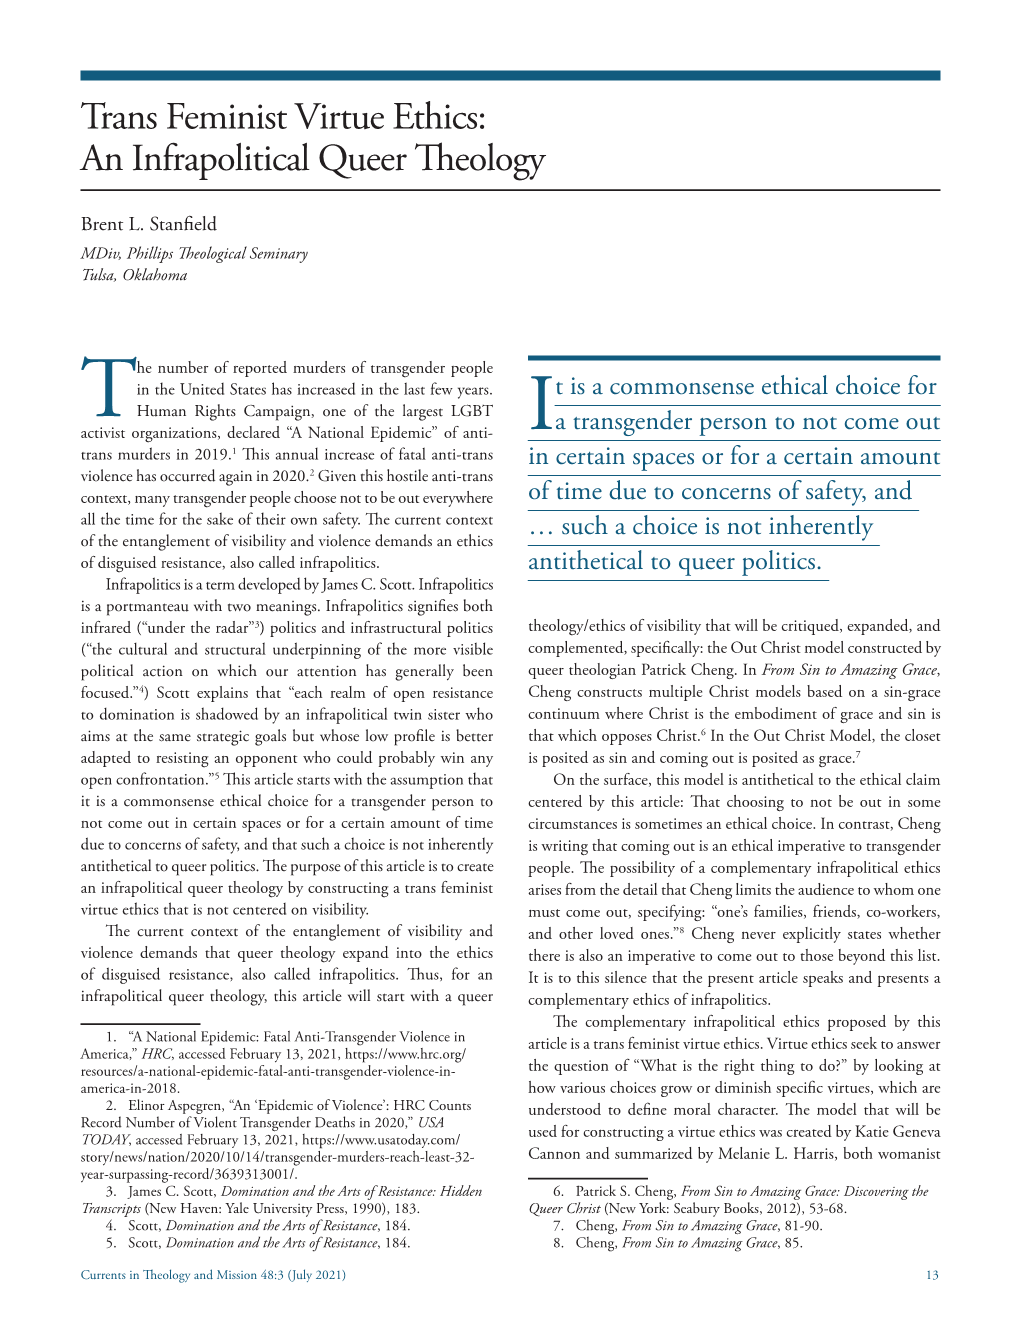 Trans Feminist Virtue Ethics: an Infrapolitical Queer Theology